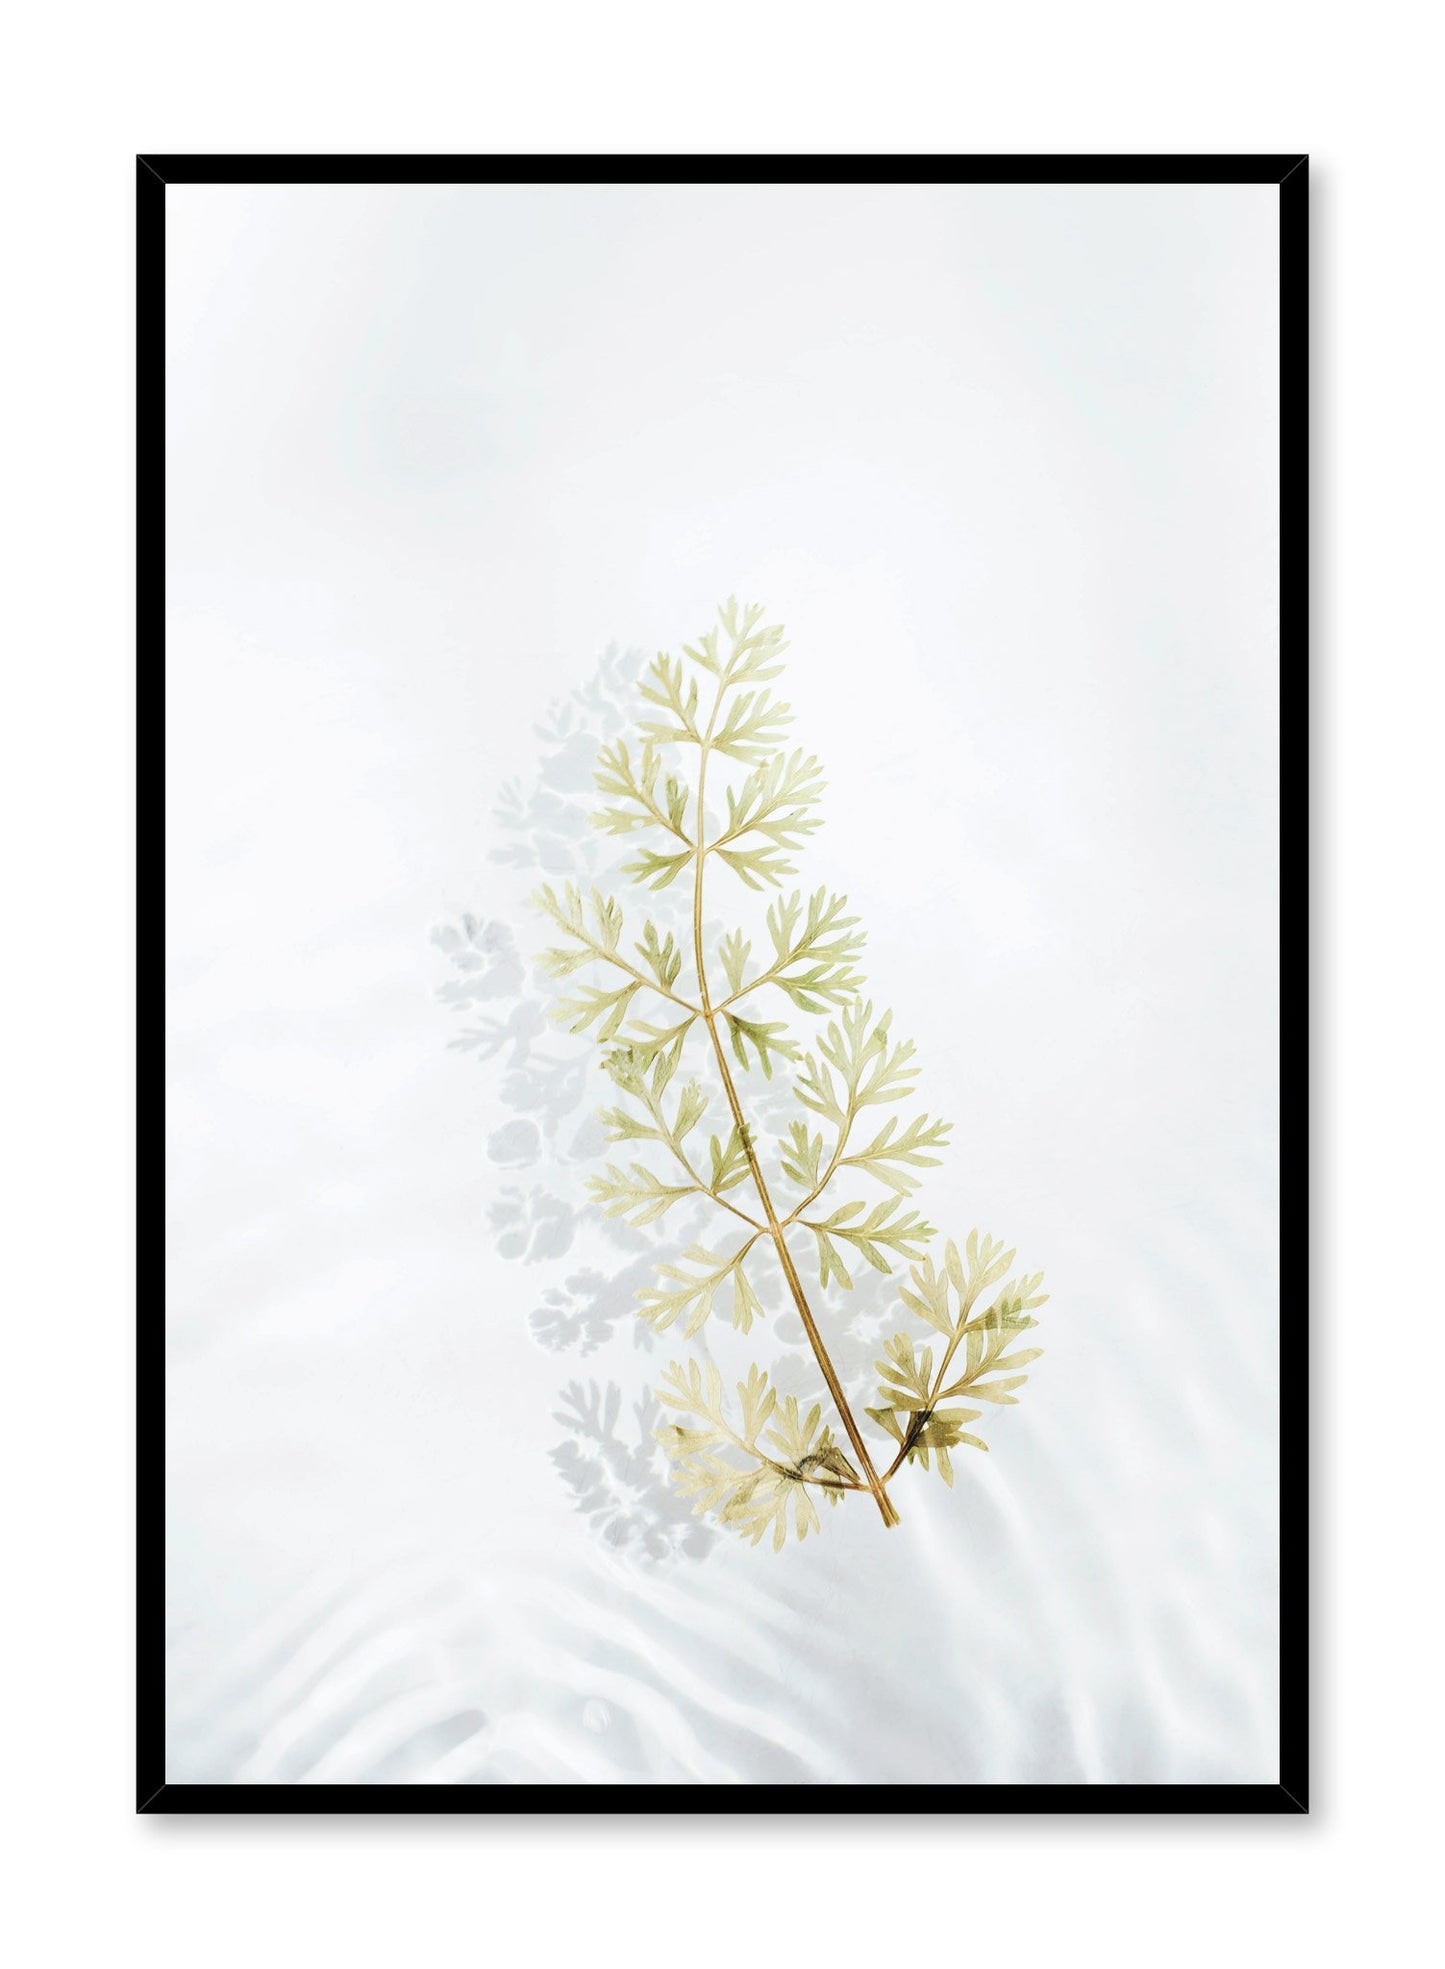 Modern minimalist botanical photography poster by Opposite Wall with floating leaf